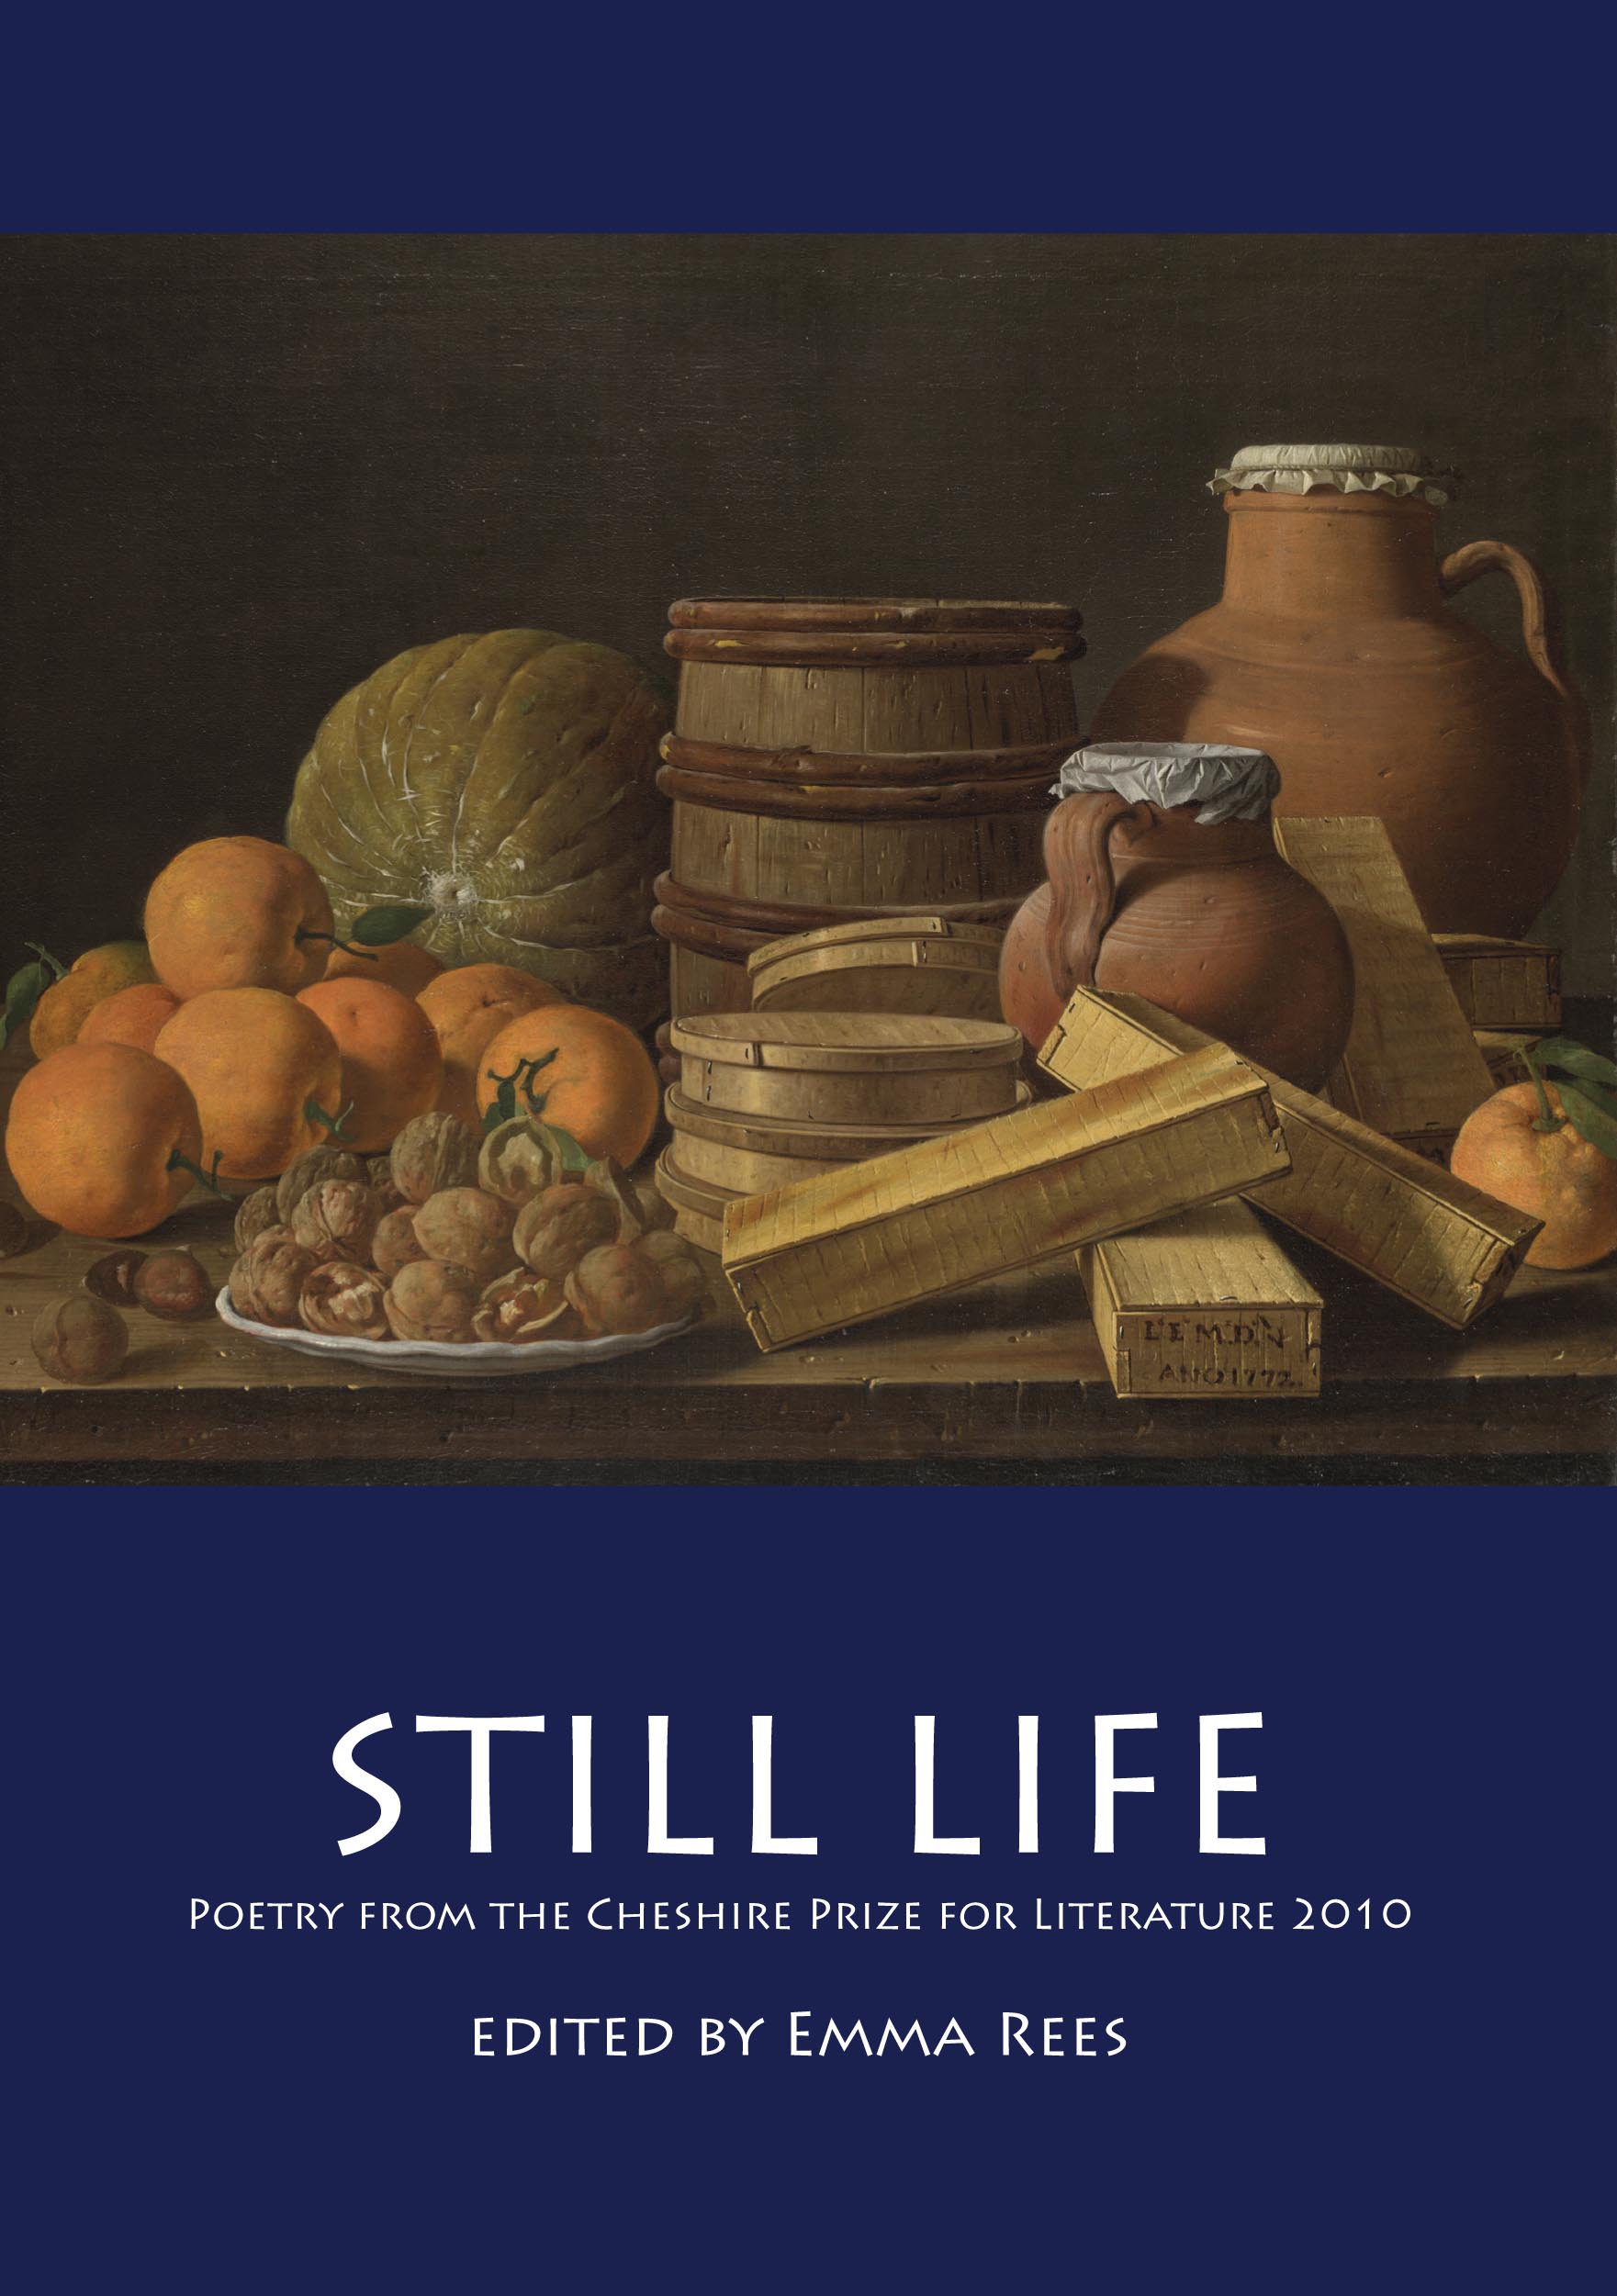 Still Life: Poetry from the Cheshire Prize for Literature 2010